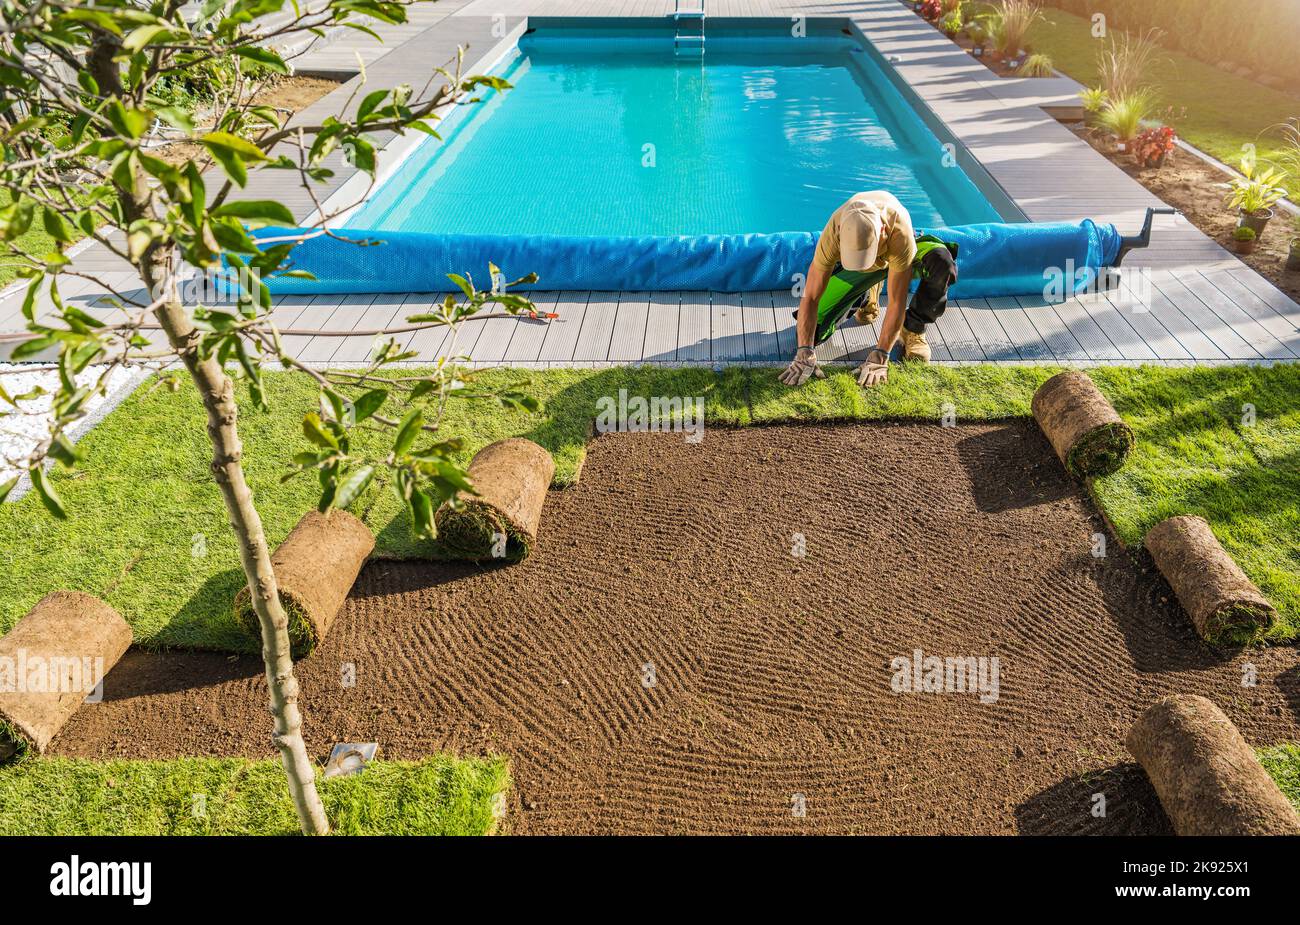 Professional Gardener Installing Roll Out Instant Lawn of Natural Grass Turfs Next to Outdoor Swimming Pool in the Backyard Garden. Landscaping Theme. Stock Photo